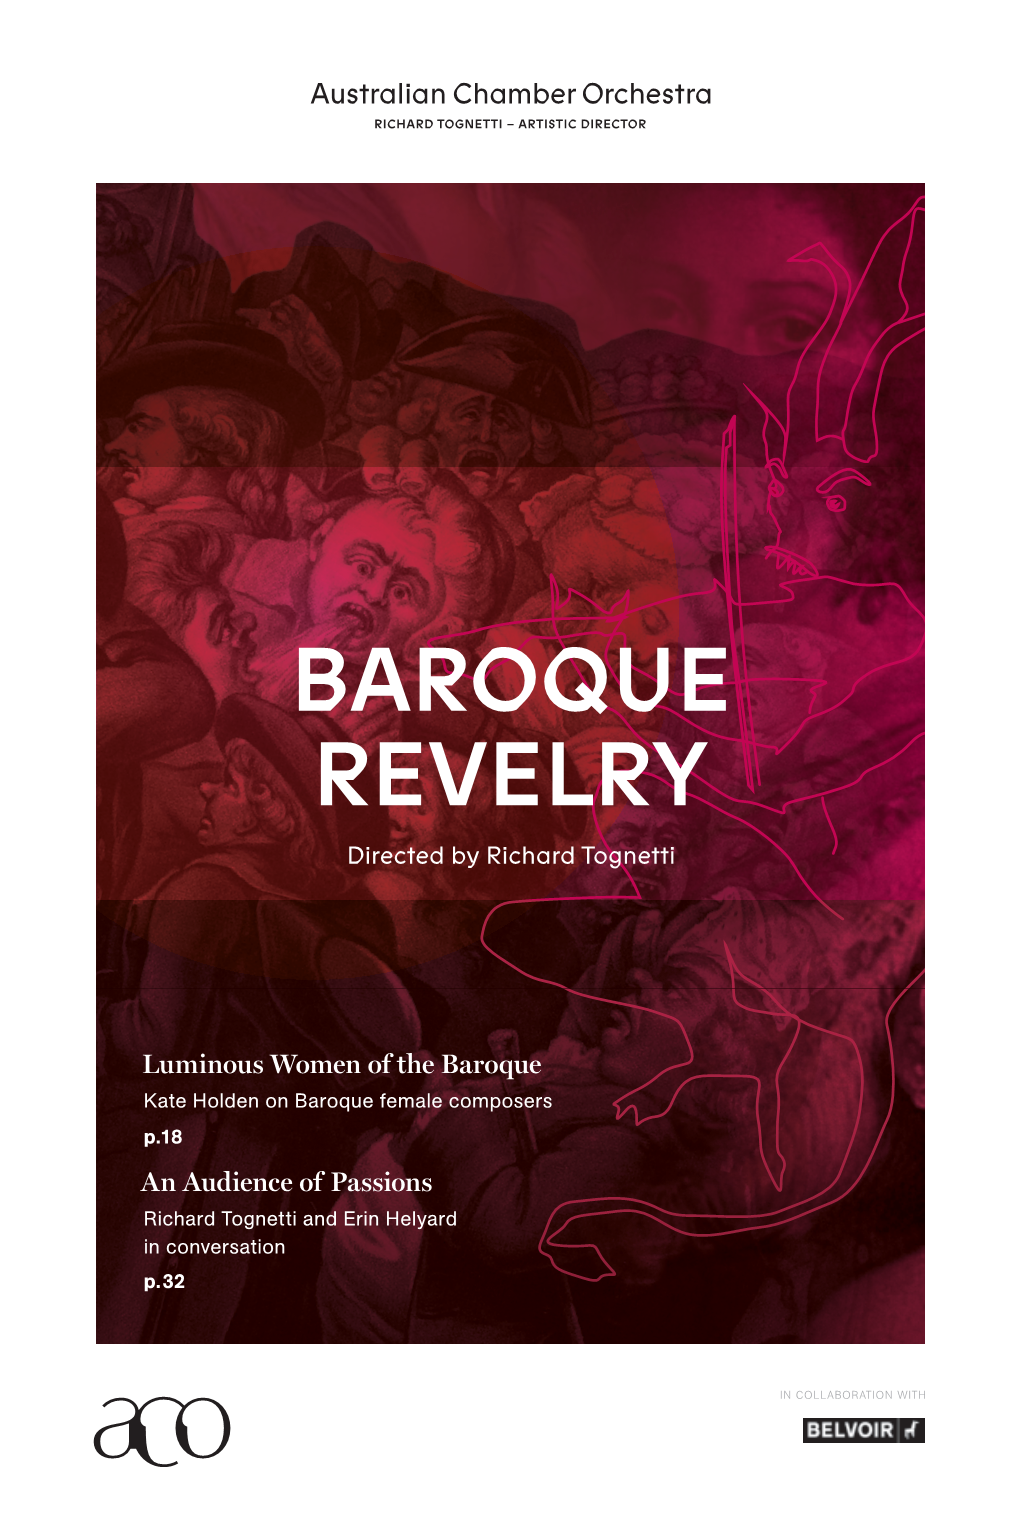 BAROQUE REVELRY STAND with US Last Year Your Donations Helped Us Survive